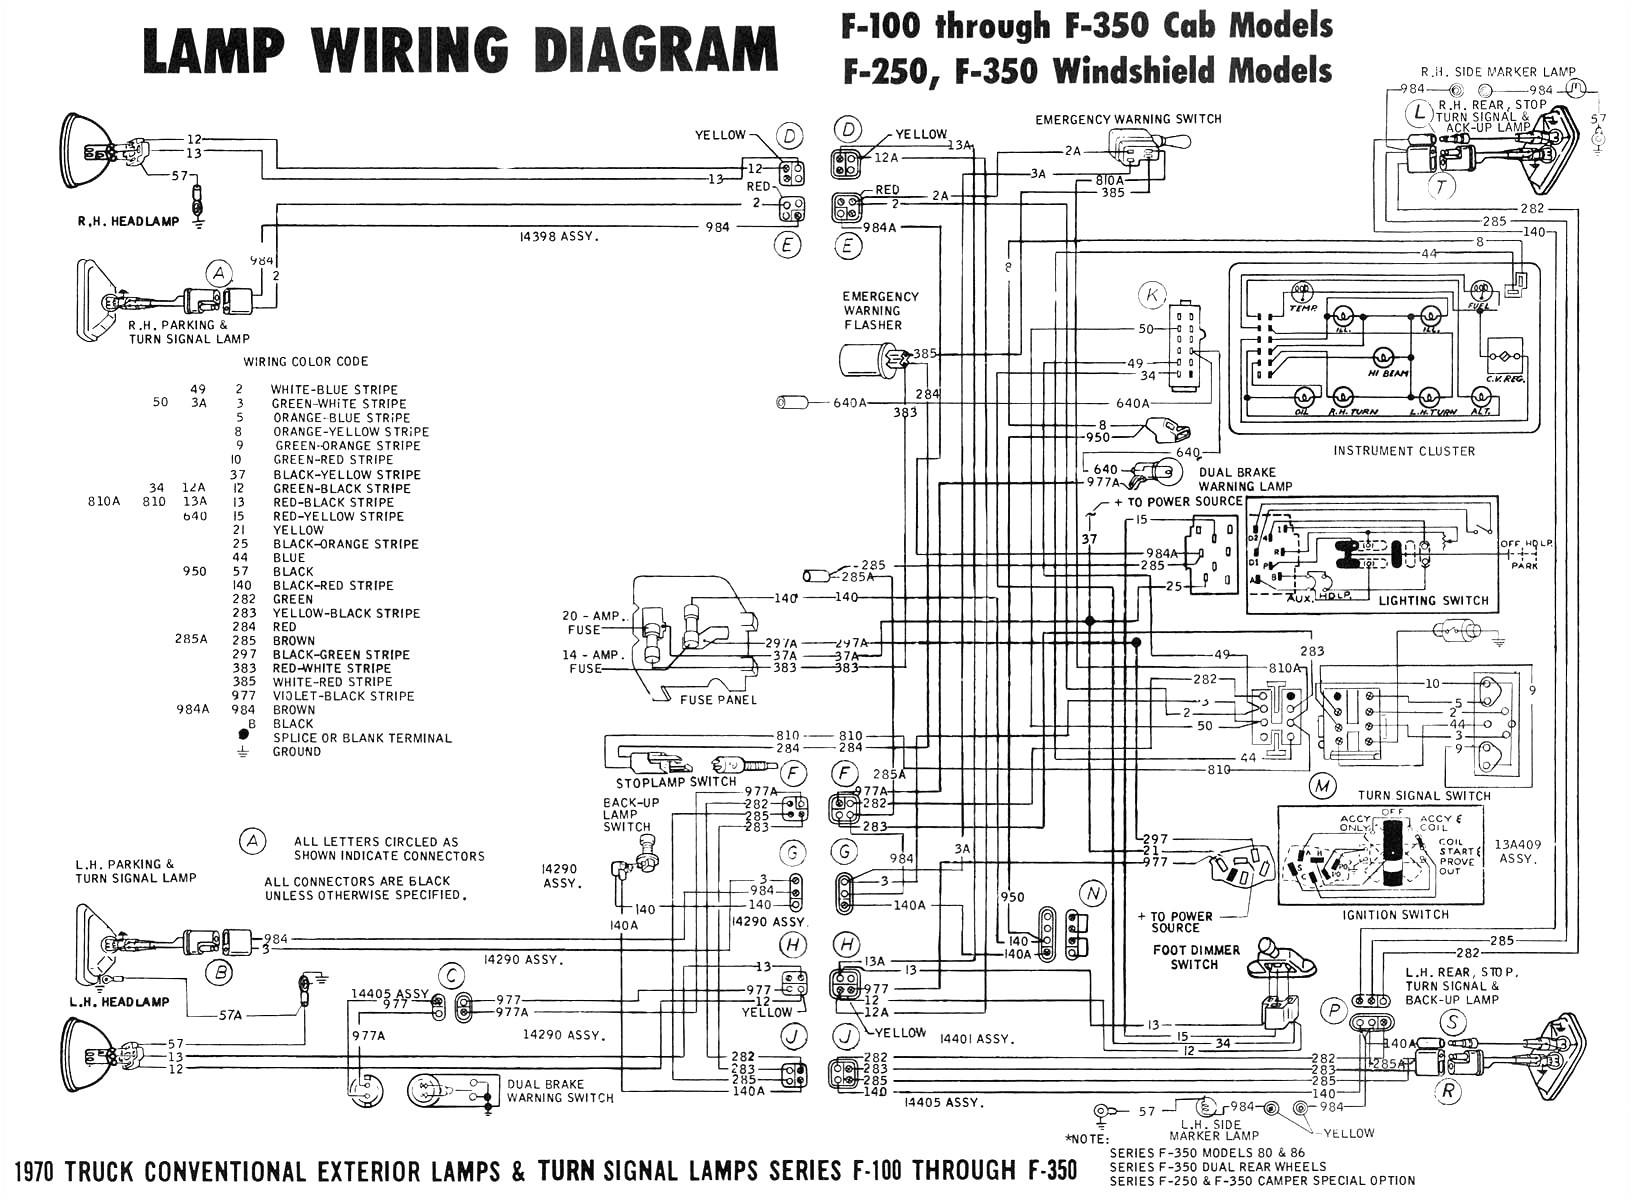 05 ford e 250 trailer wiring wiring diagram used 05 ford e 250 trailer wiring